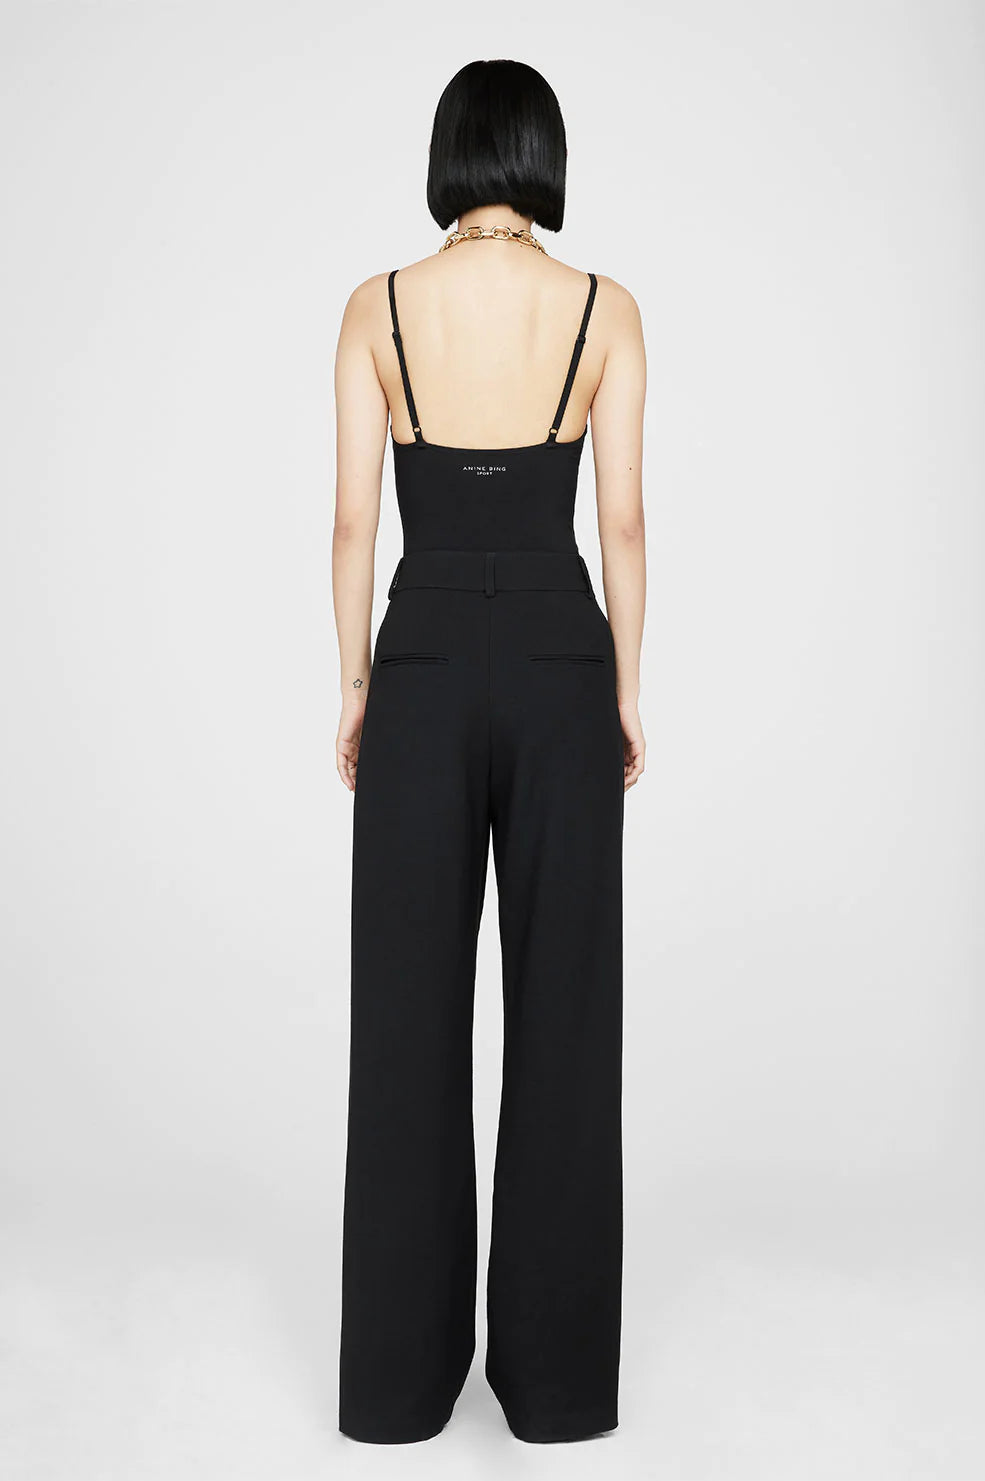 Anine Bing Carrie Pant - Black Twill